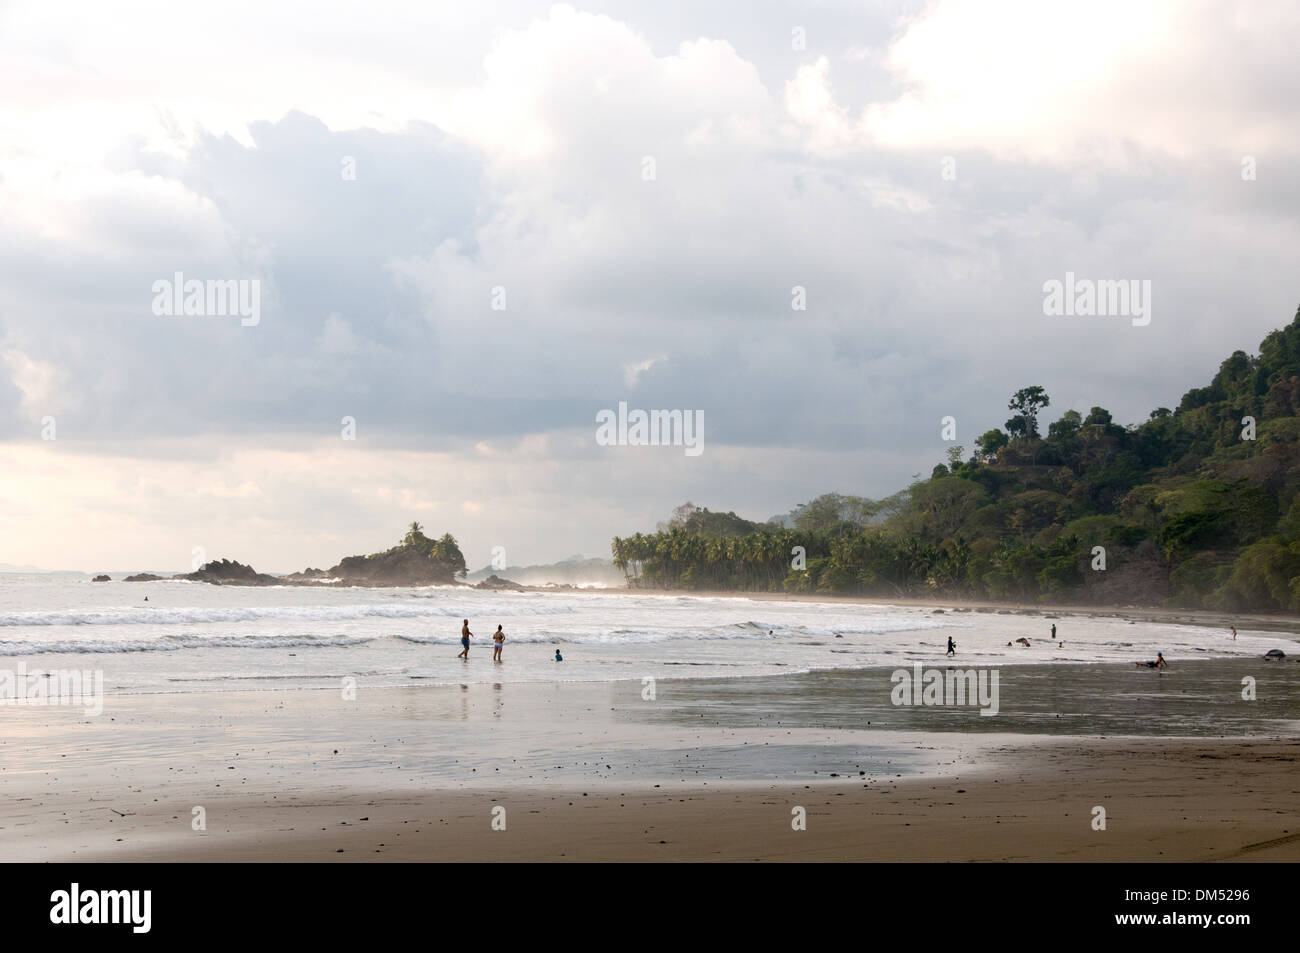 Dominical Puntarenas Costa Rica High Resolution Stock Photography and  Images - Alamy